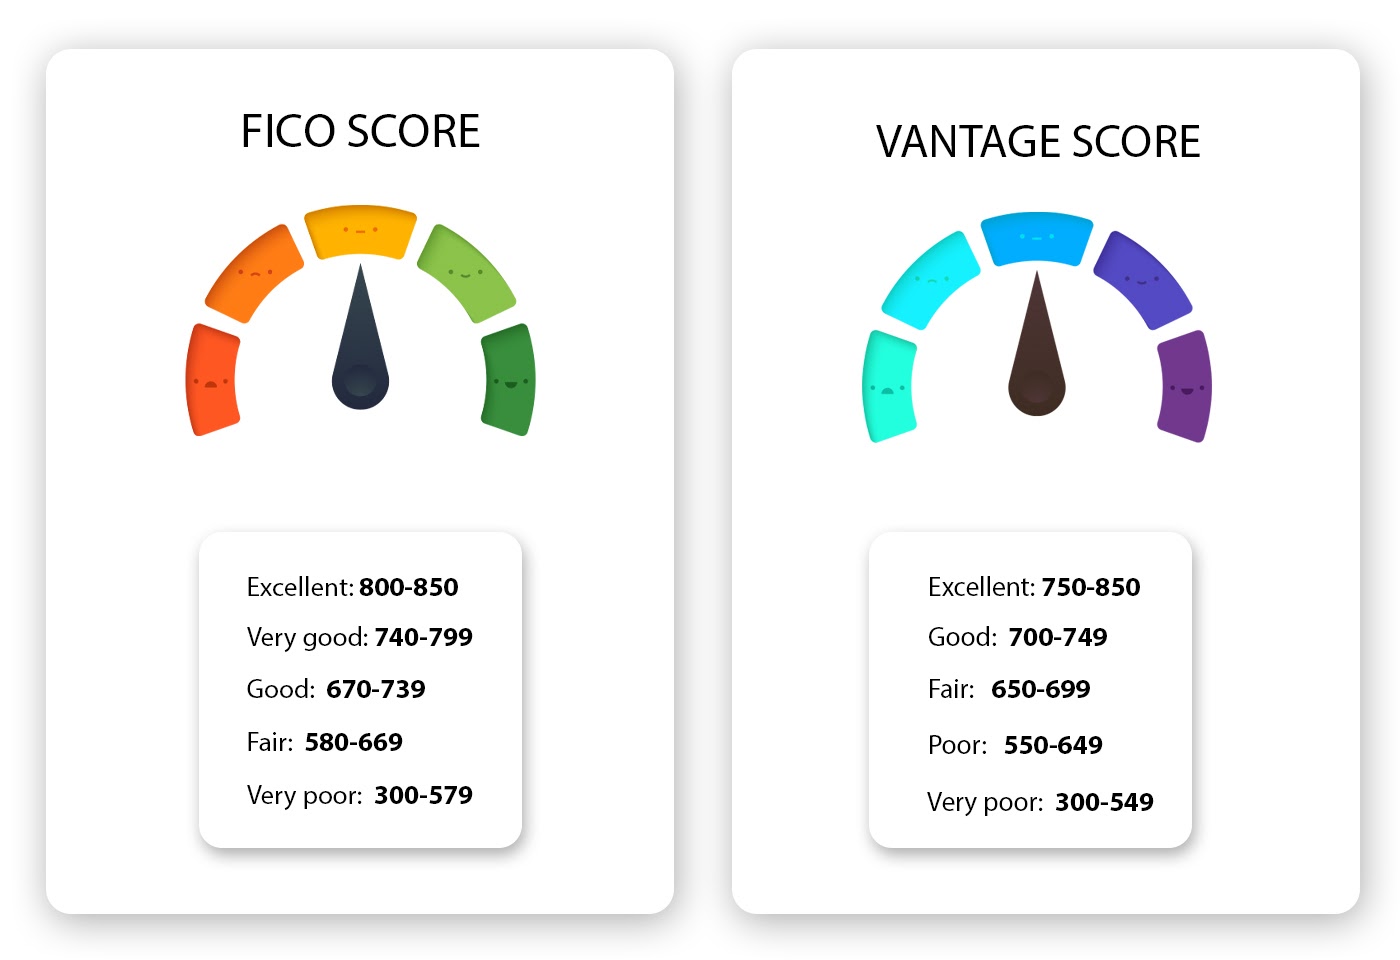 What Is The Highest Credit Score - Complete Guide 2022 | ShinyLoans